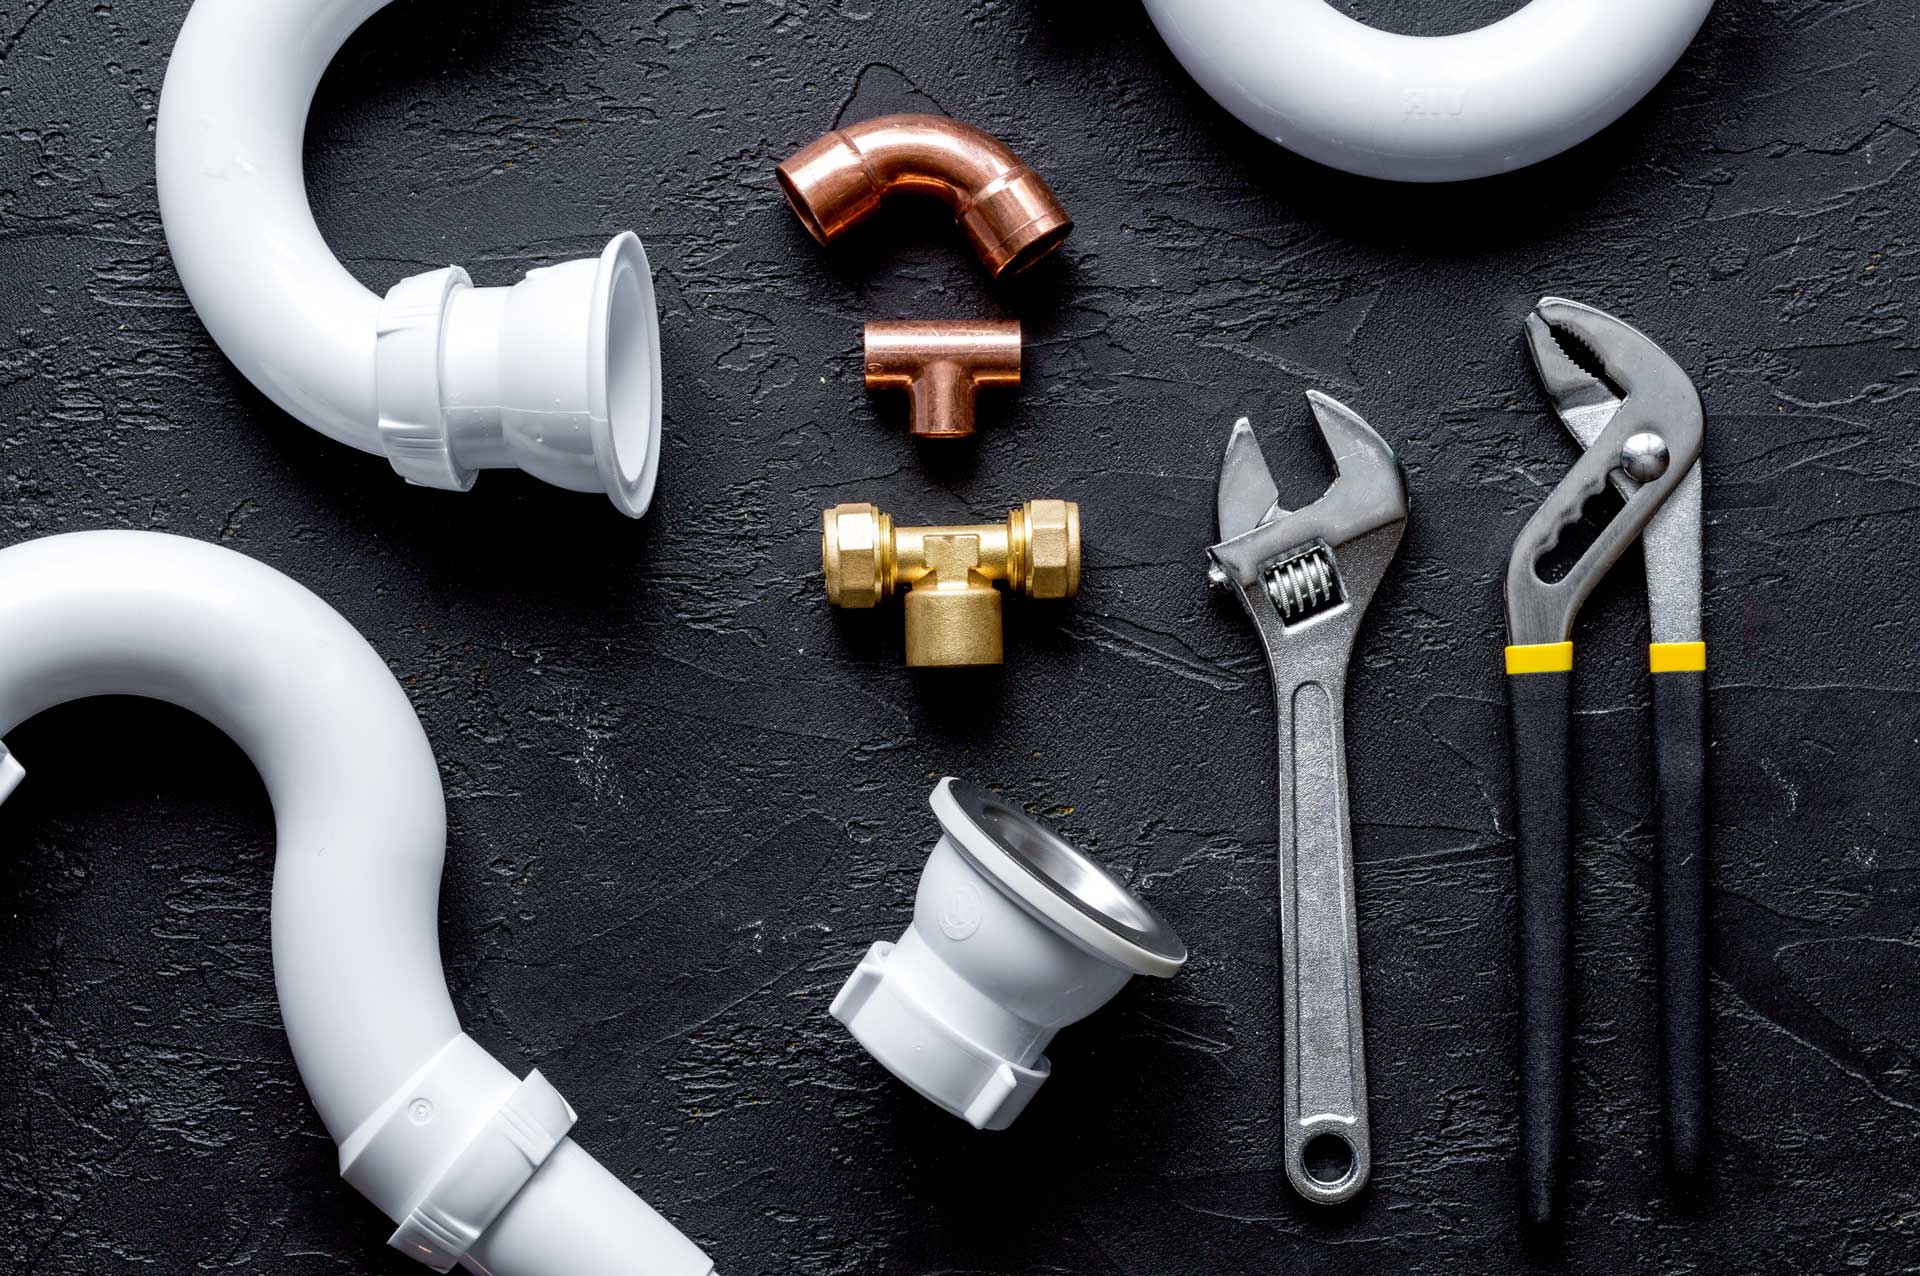 Plumbing and the Holidays